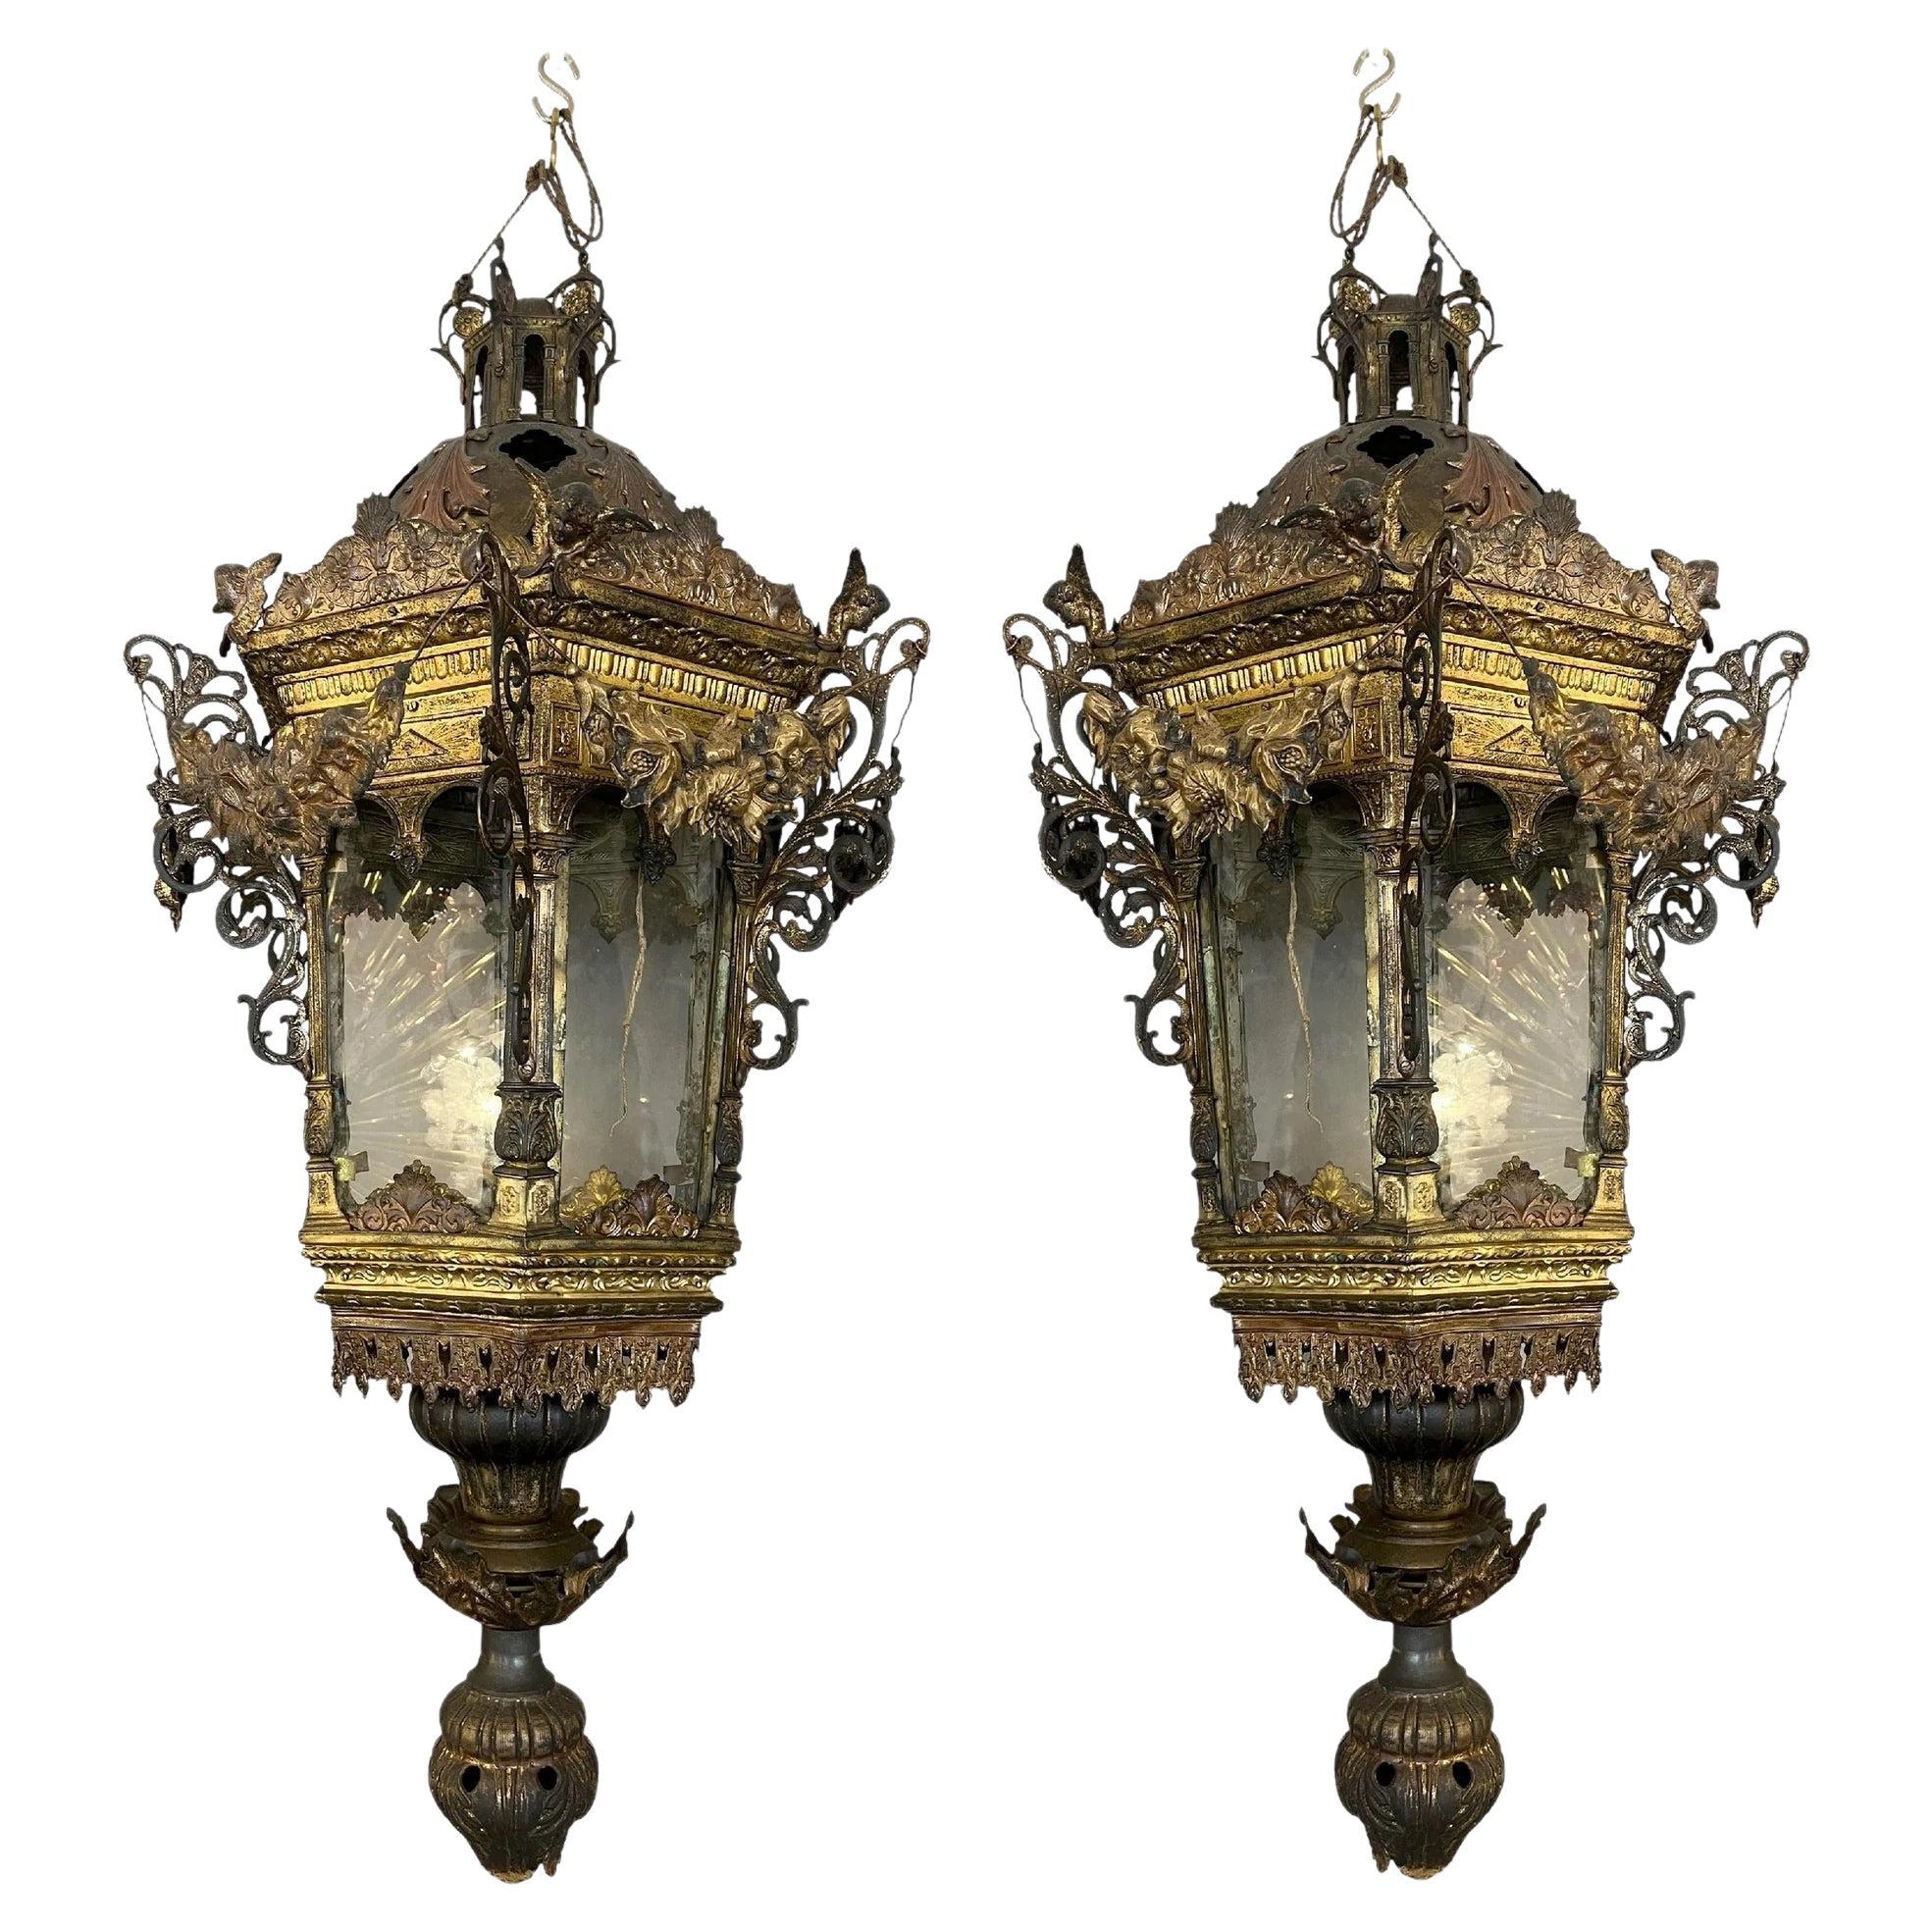 Pair of gilded and stamped copper lanterns, 19th century, Venice, Italy